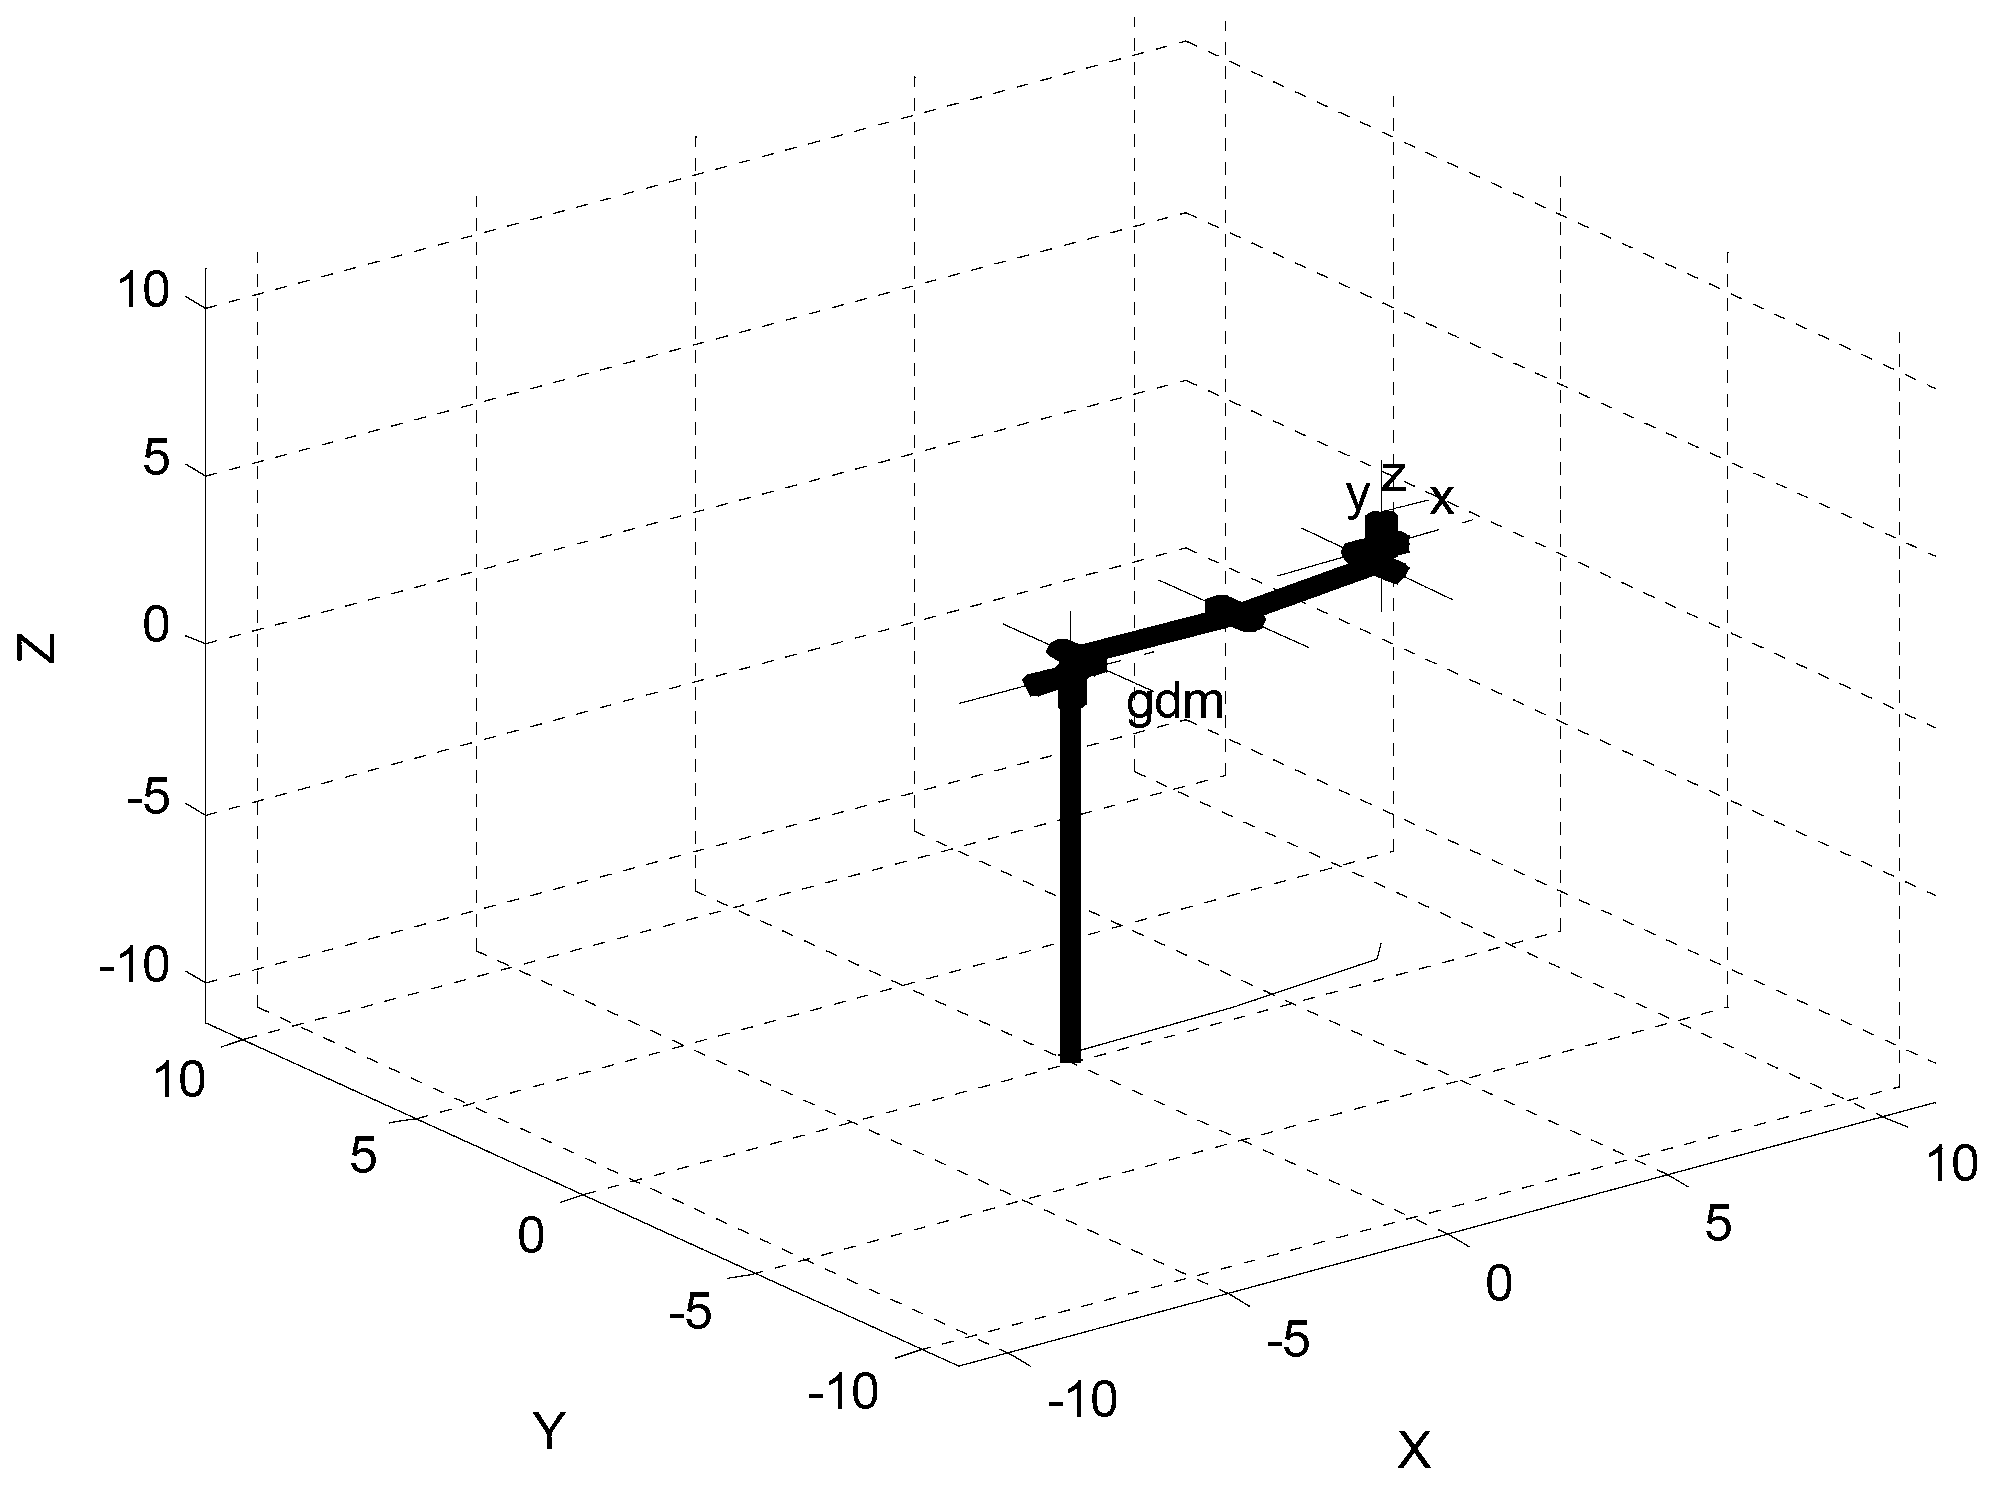 Position/force hybrid control method for space manipulator